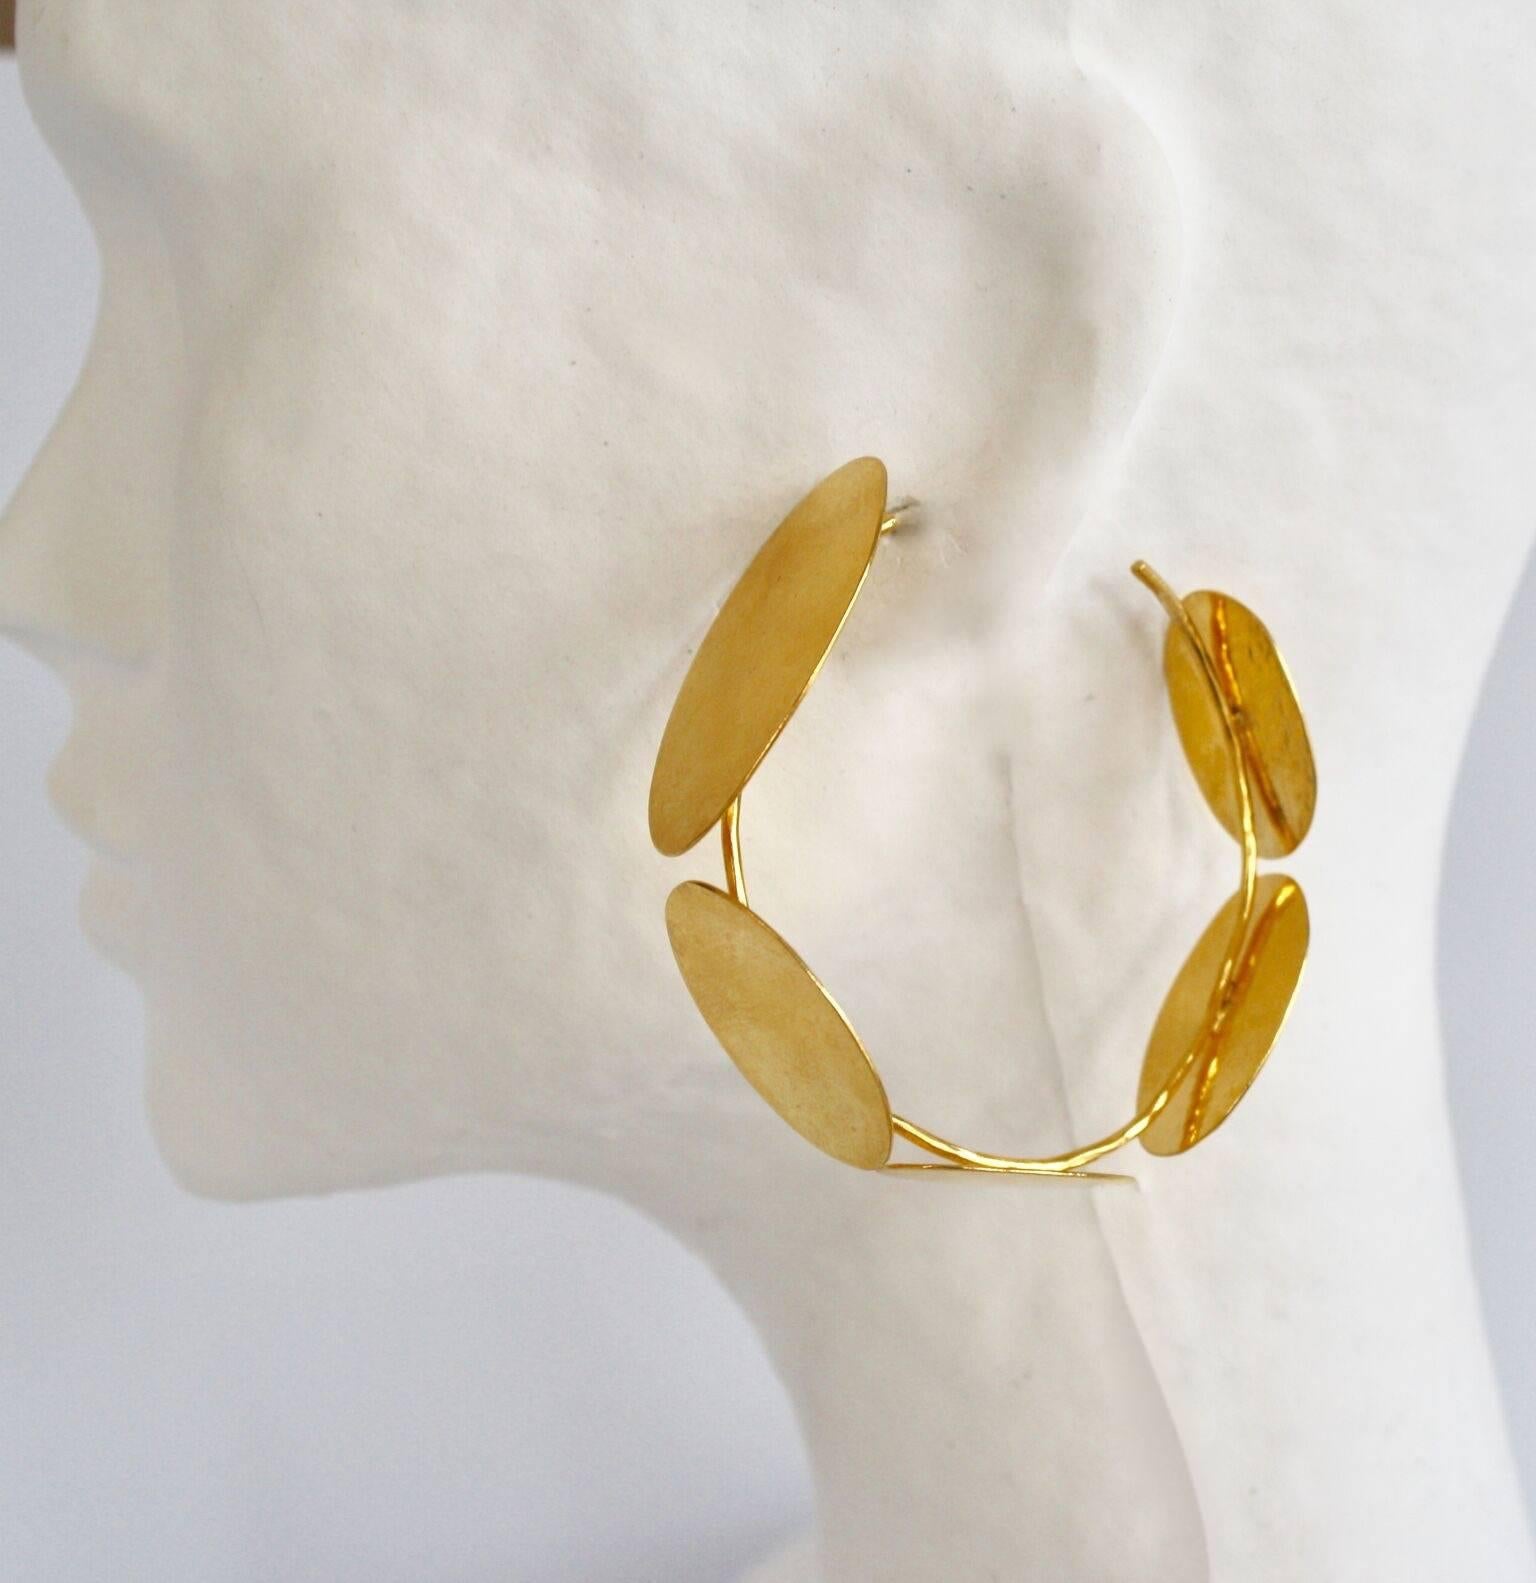 Gilded brass hoop earrings with multi petal motif from Herve van der Straeten. This designer is no longer producing jewelry, thus all pieces are now considered collectors items!